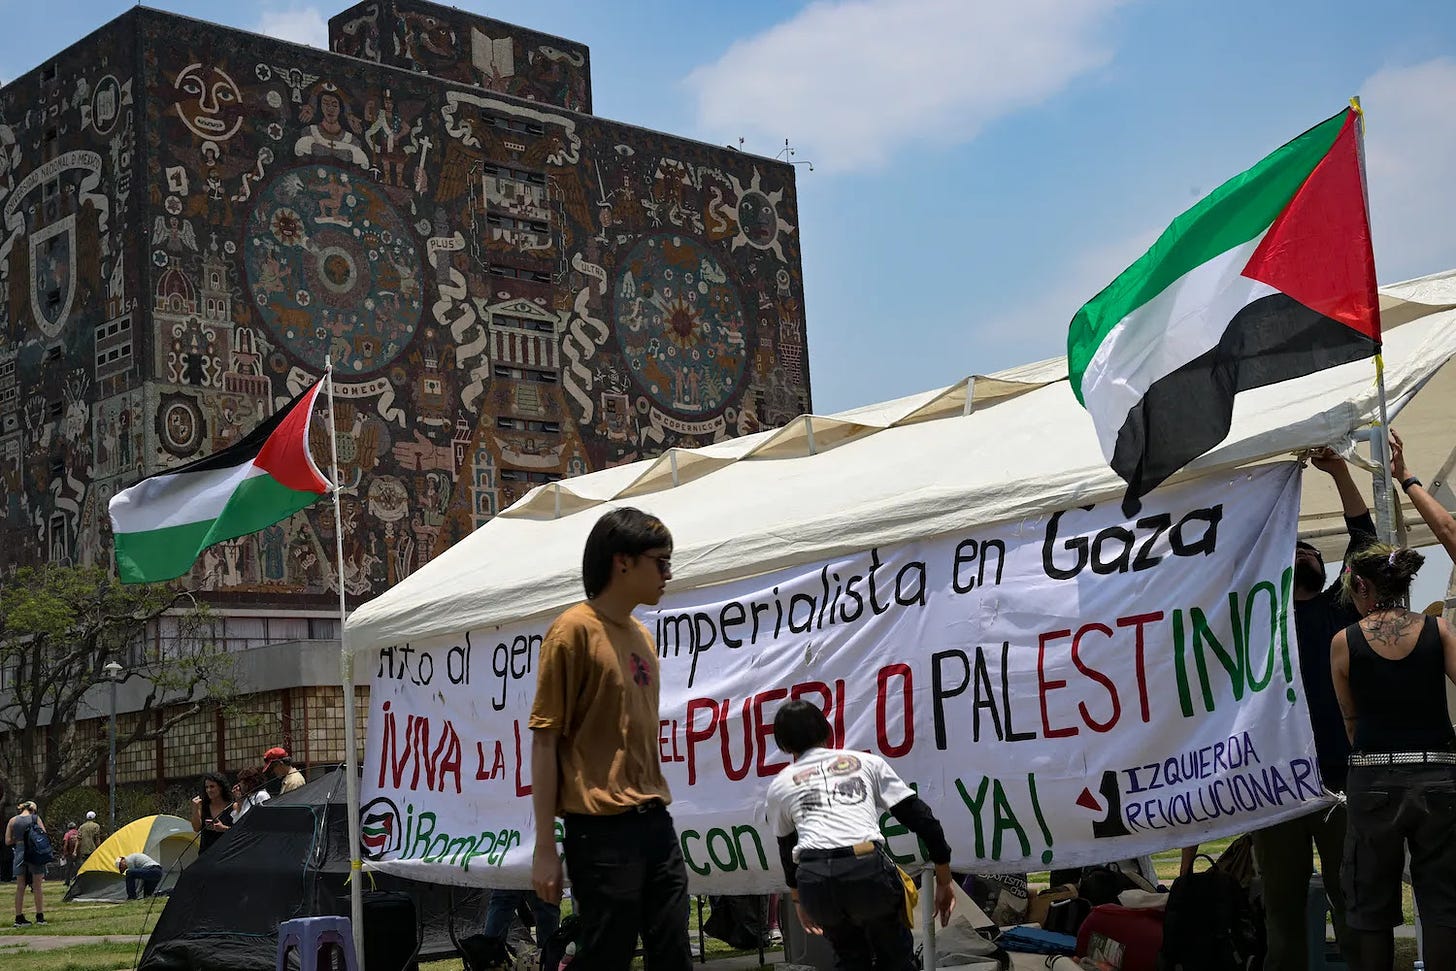 Pro-Palestinian protesters erect a tent in front of the rectory building of the National Autonomous University of Mexico.